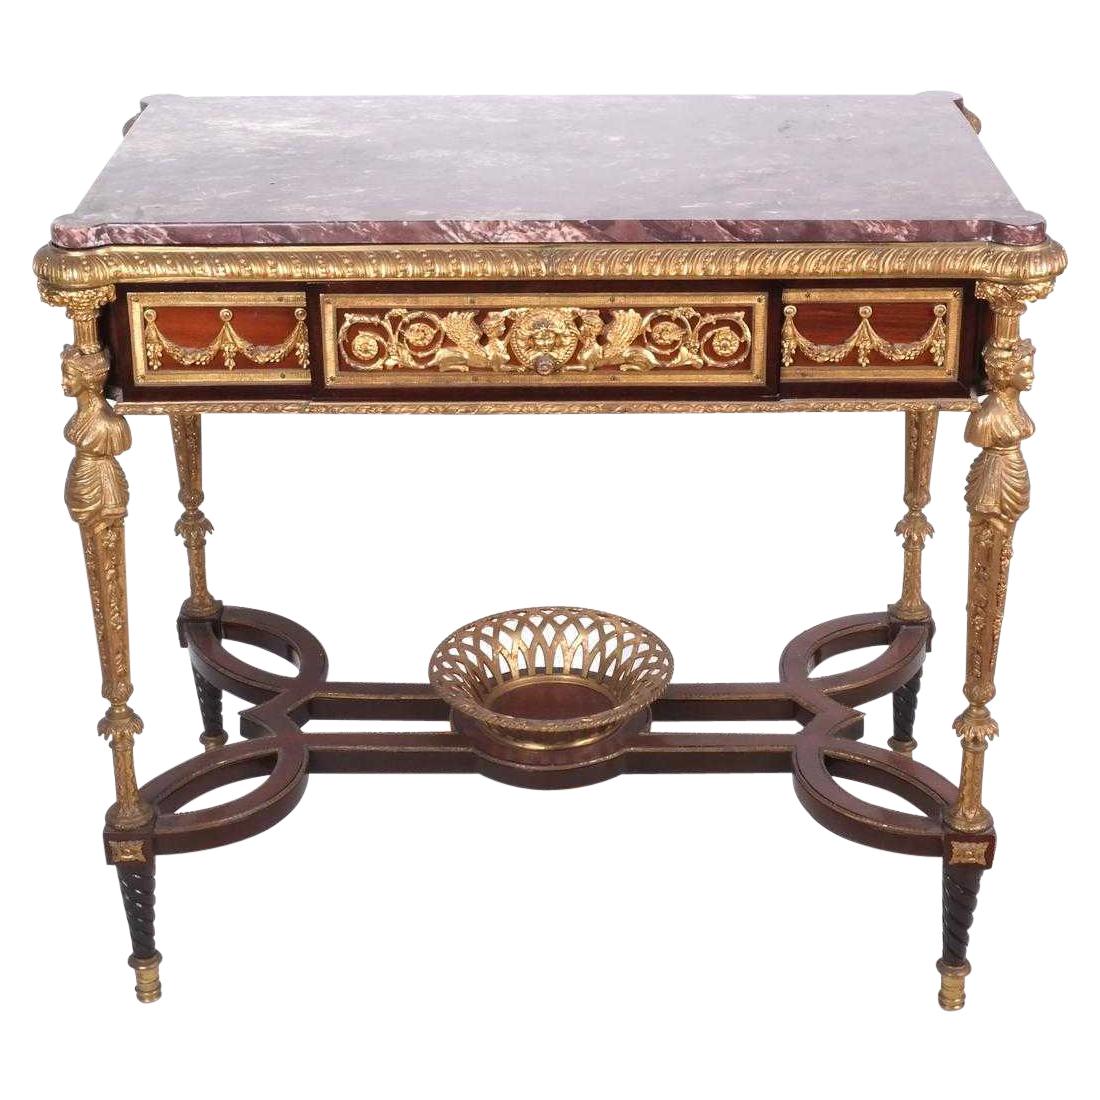 Louis XVI Style Bronze Center Table Desk in Adam Weisweiler Manner with Marble